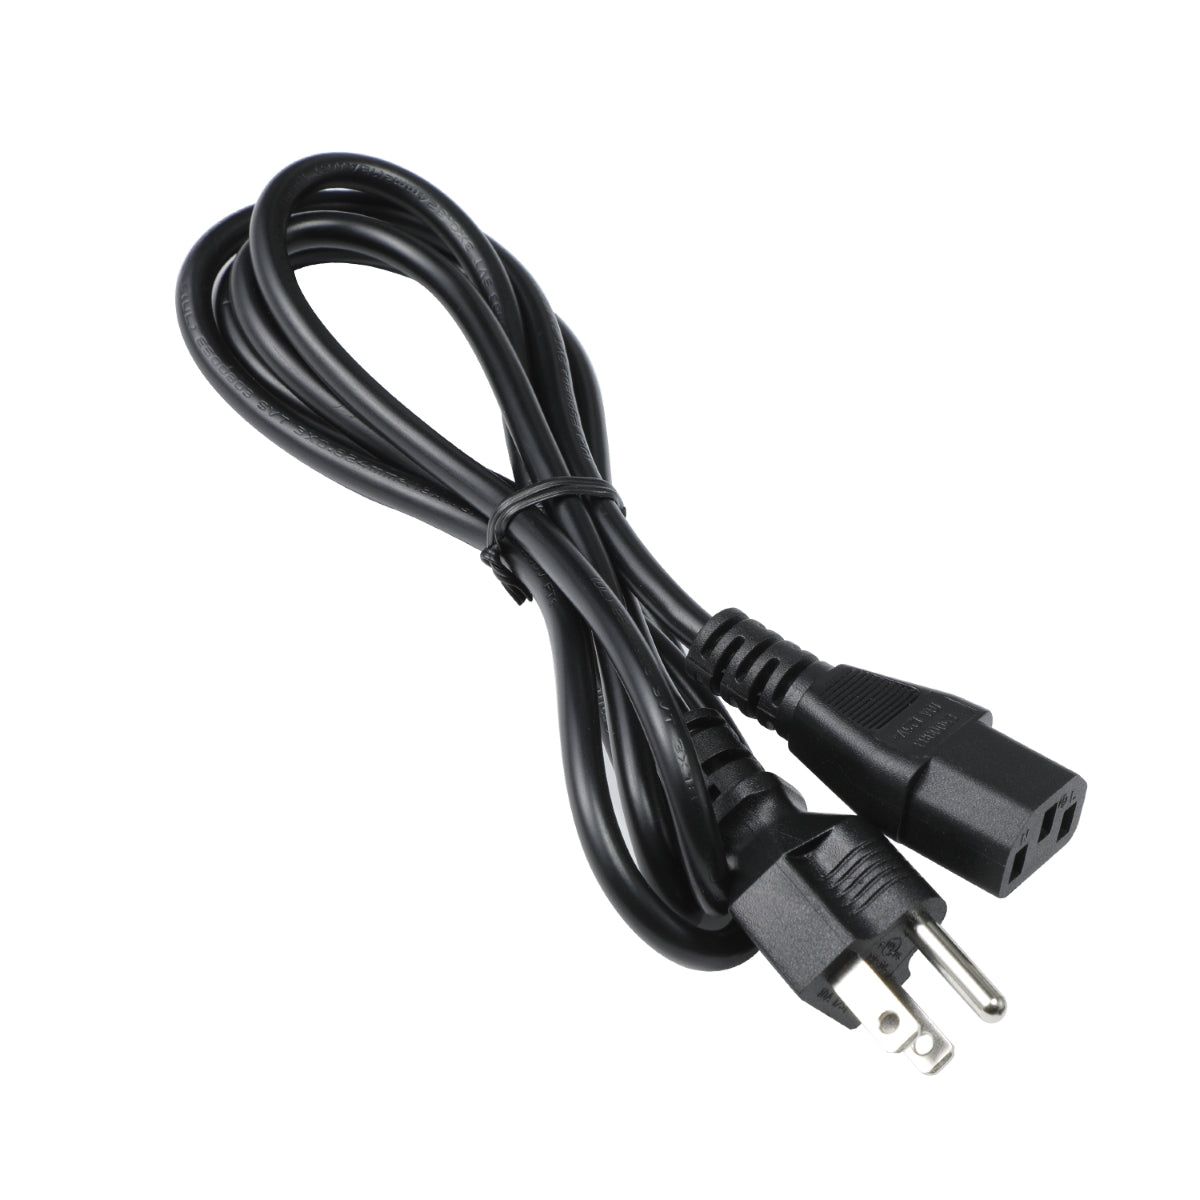 Power Cord for BenQ PV270 IPS Monitor